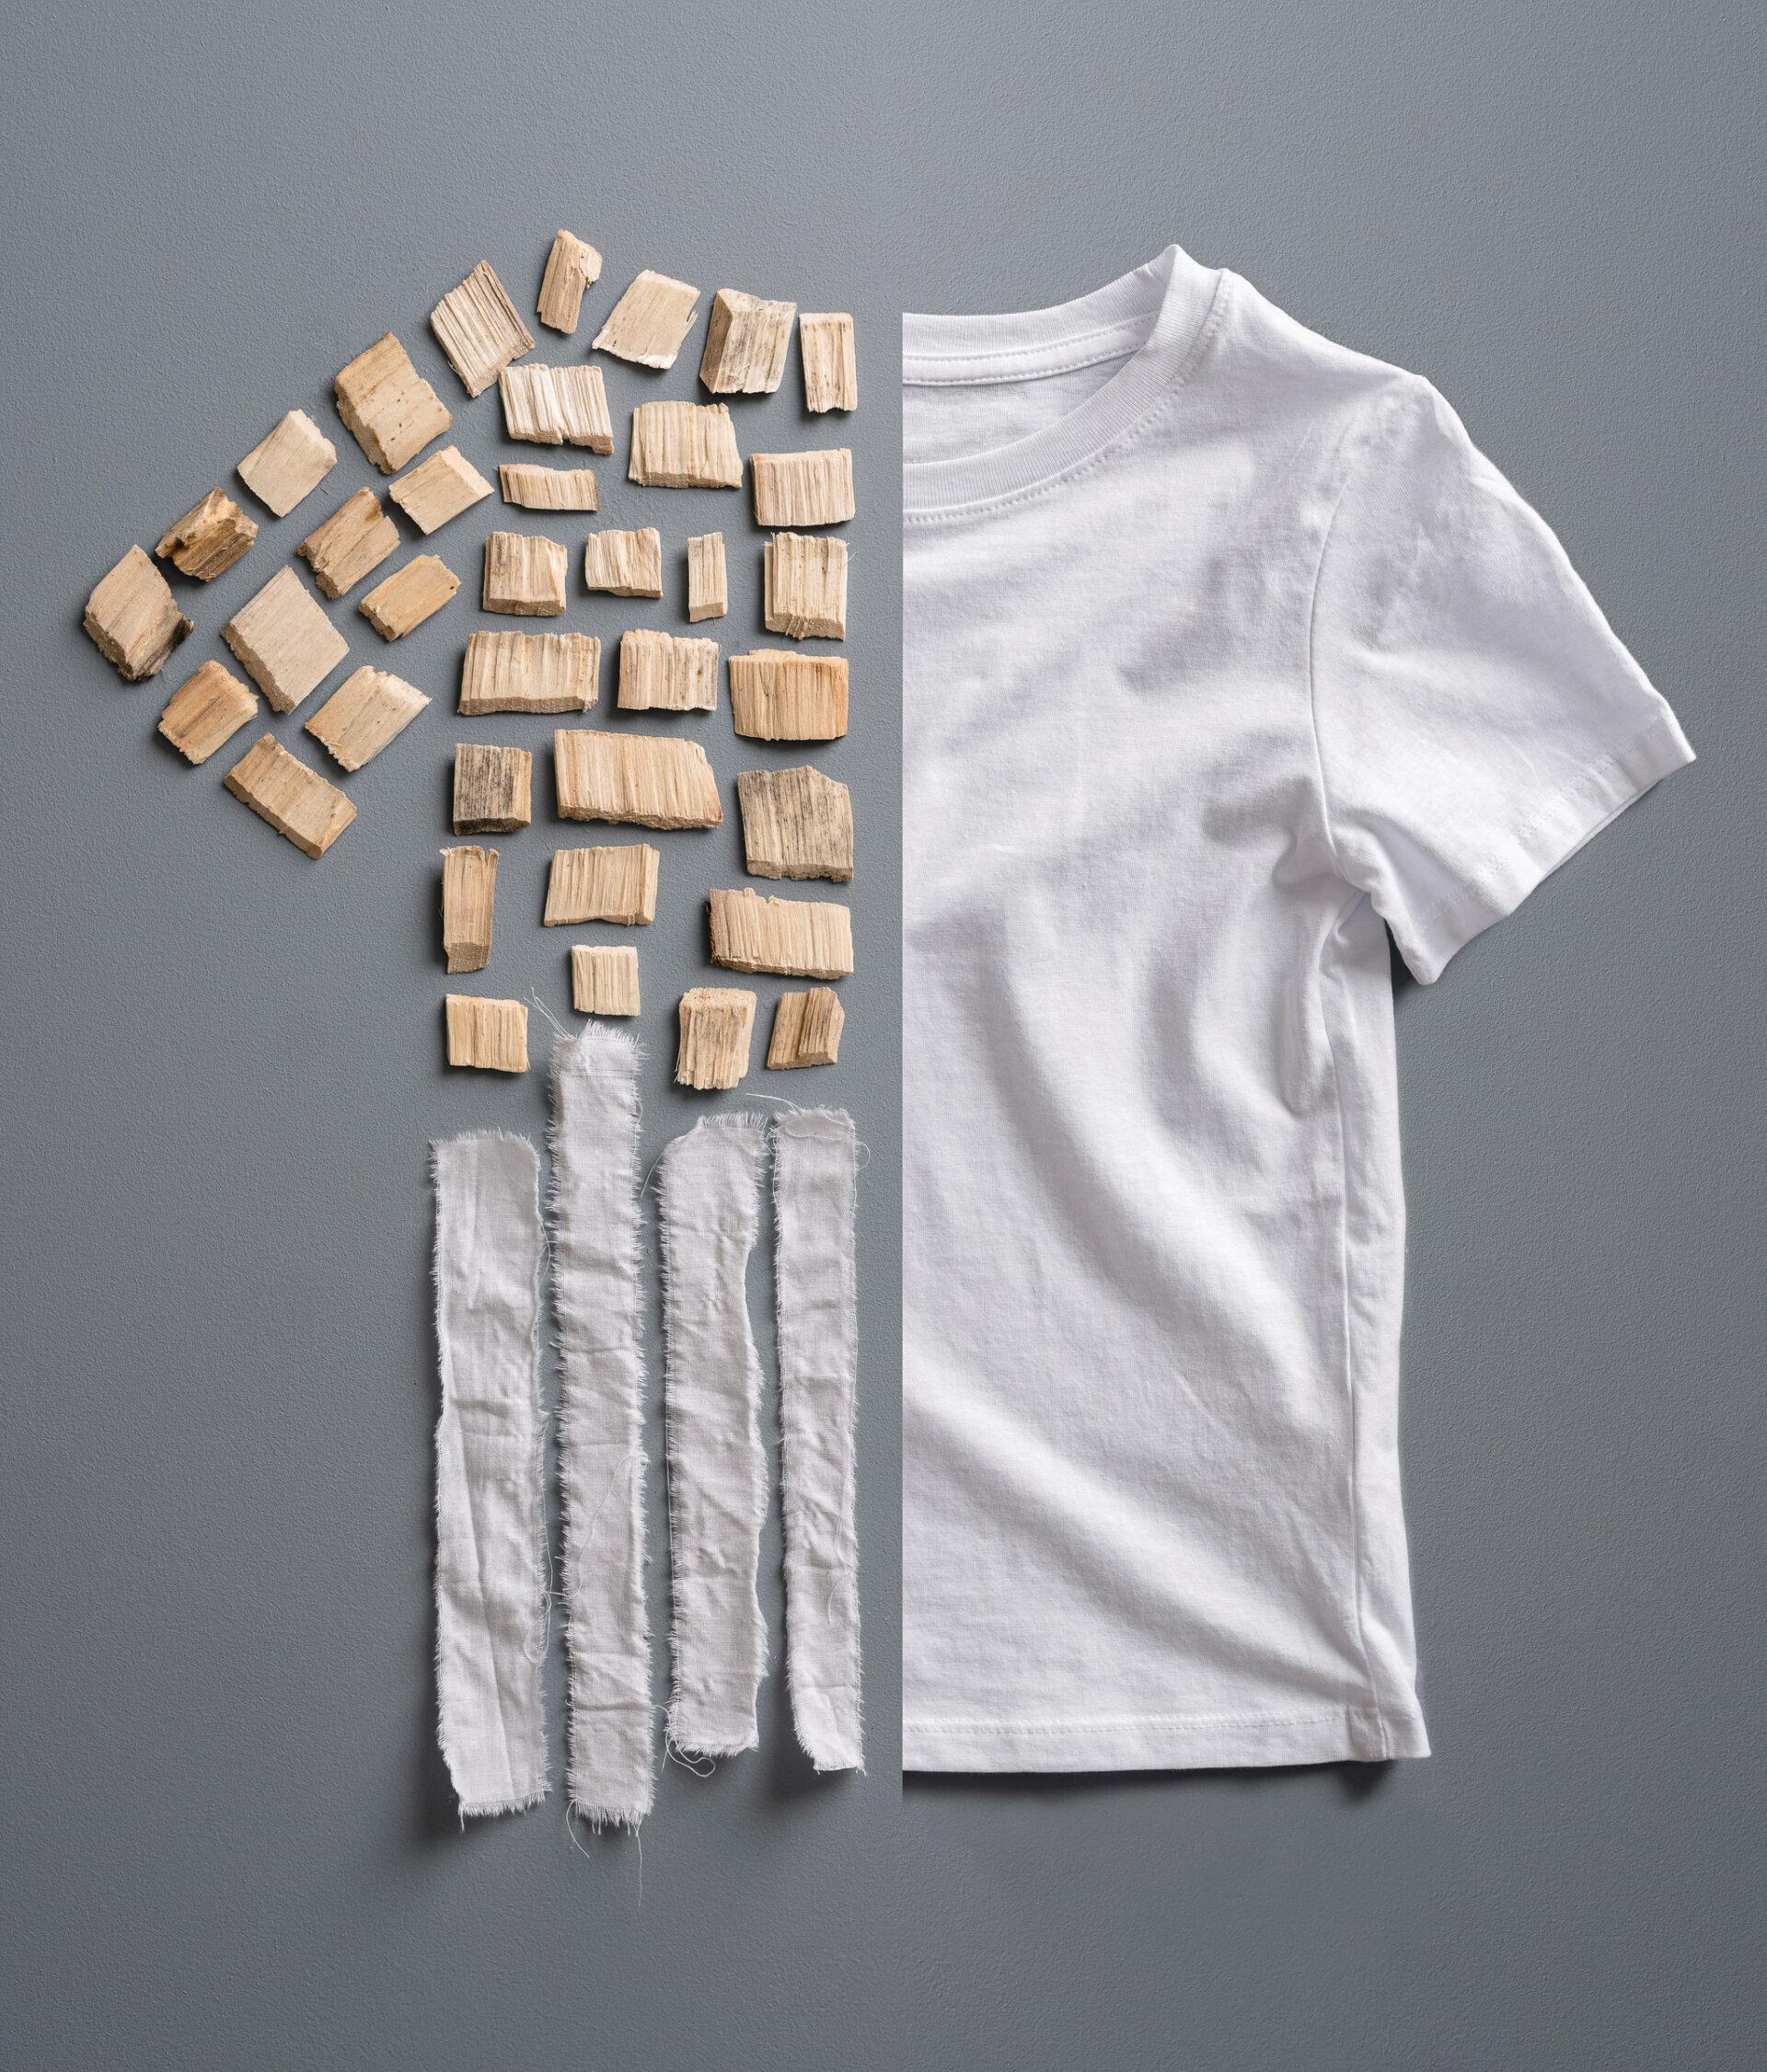 A T-shirt half made up of fabric, half of pieces of wood and strips of fabric.